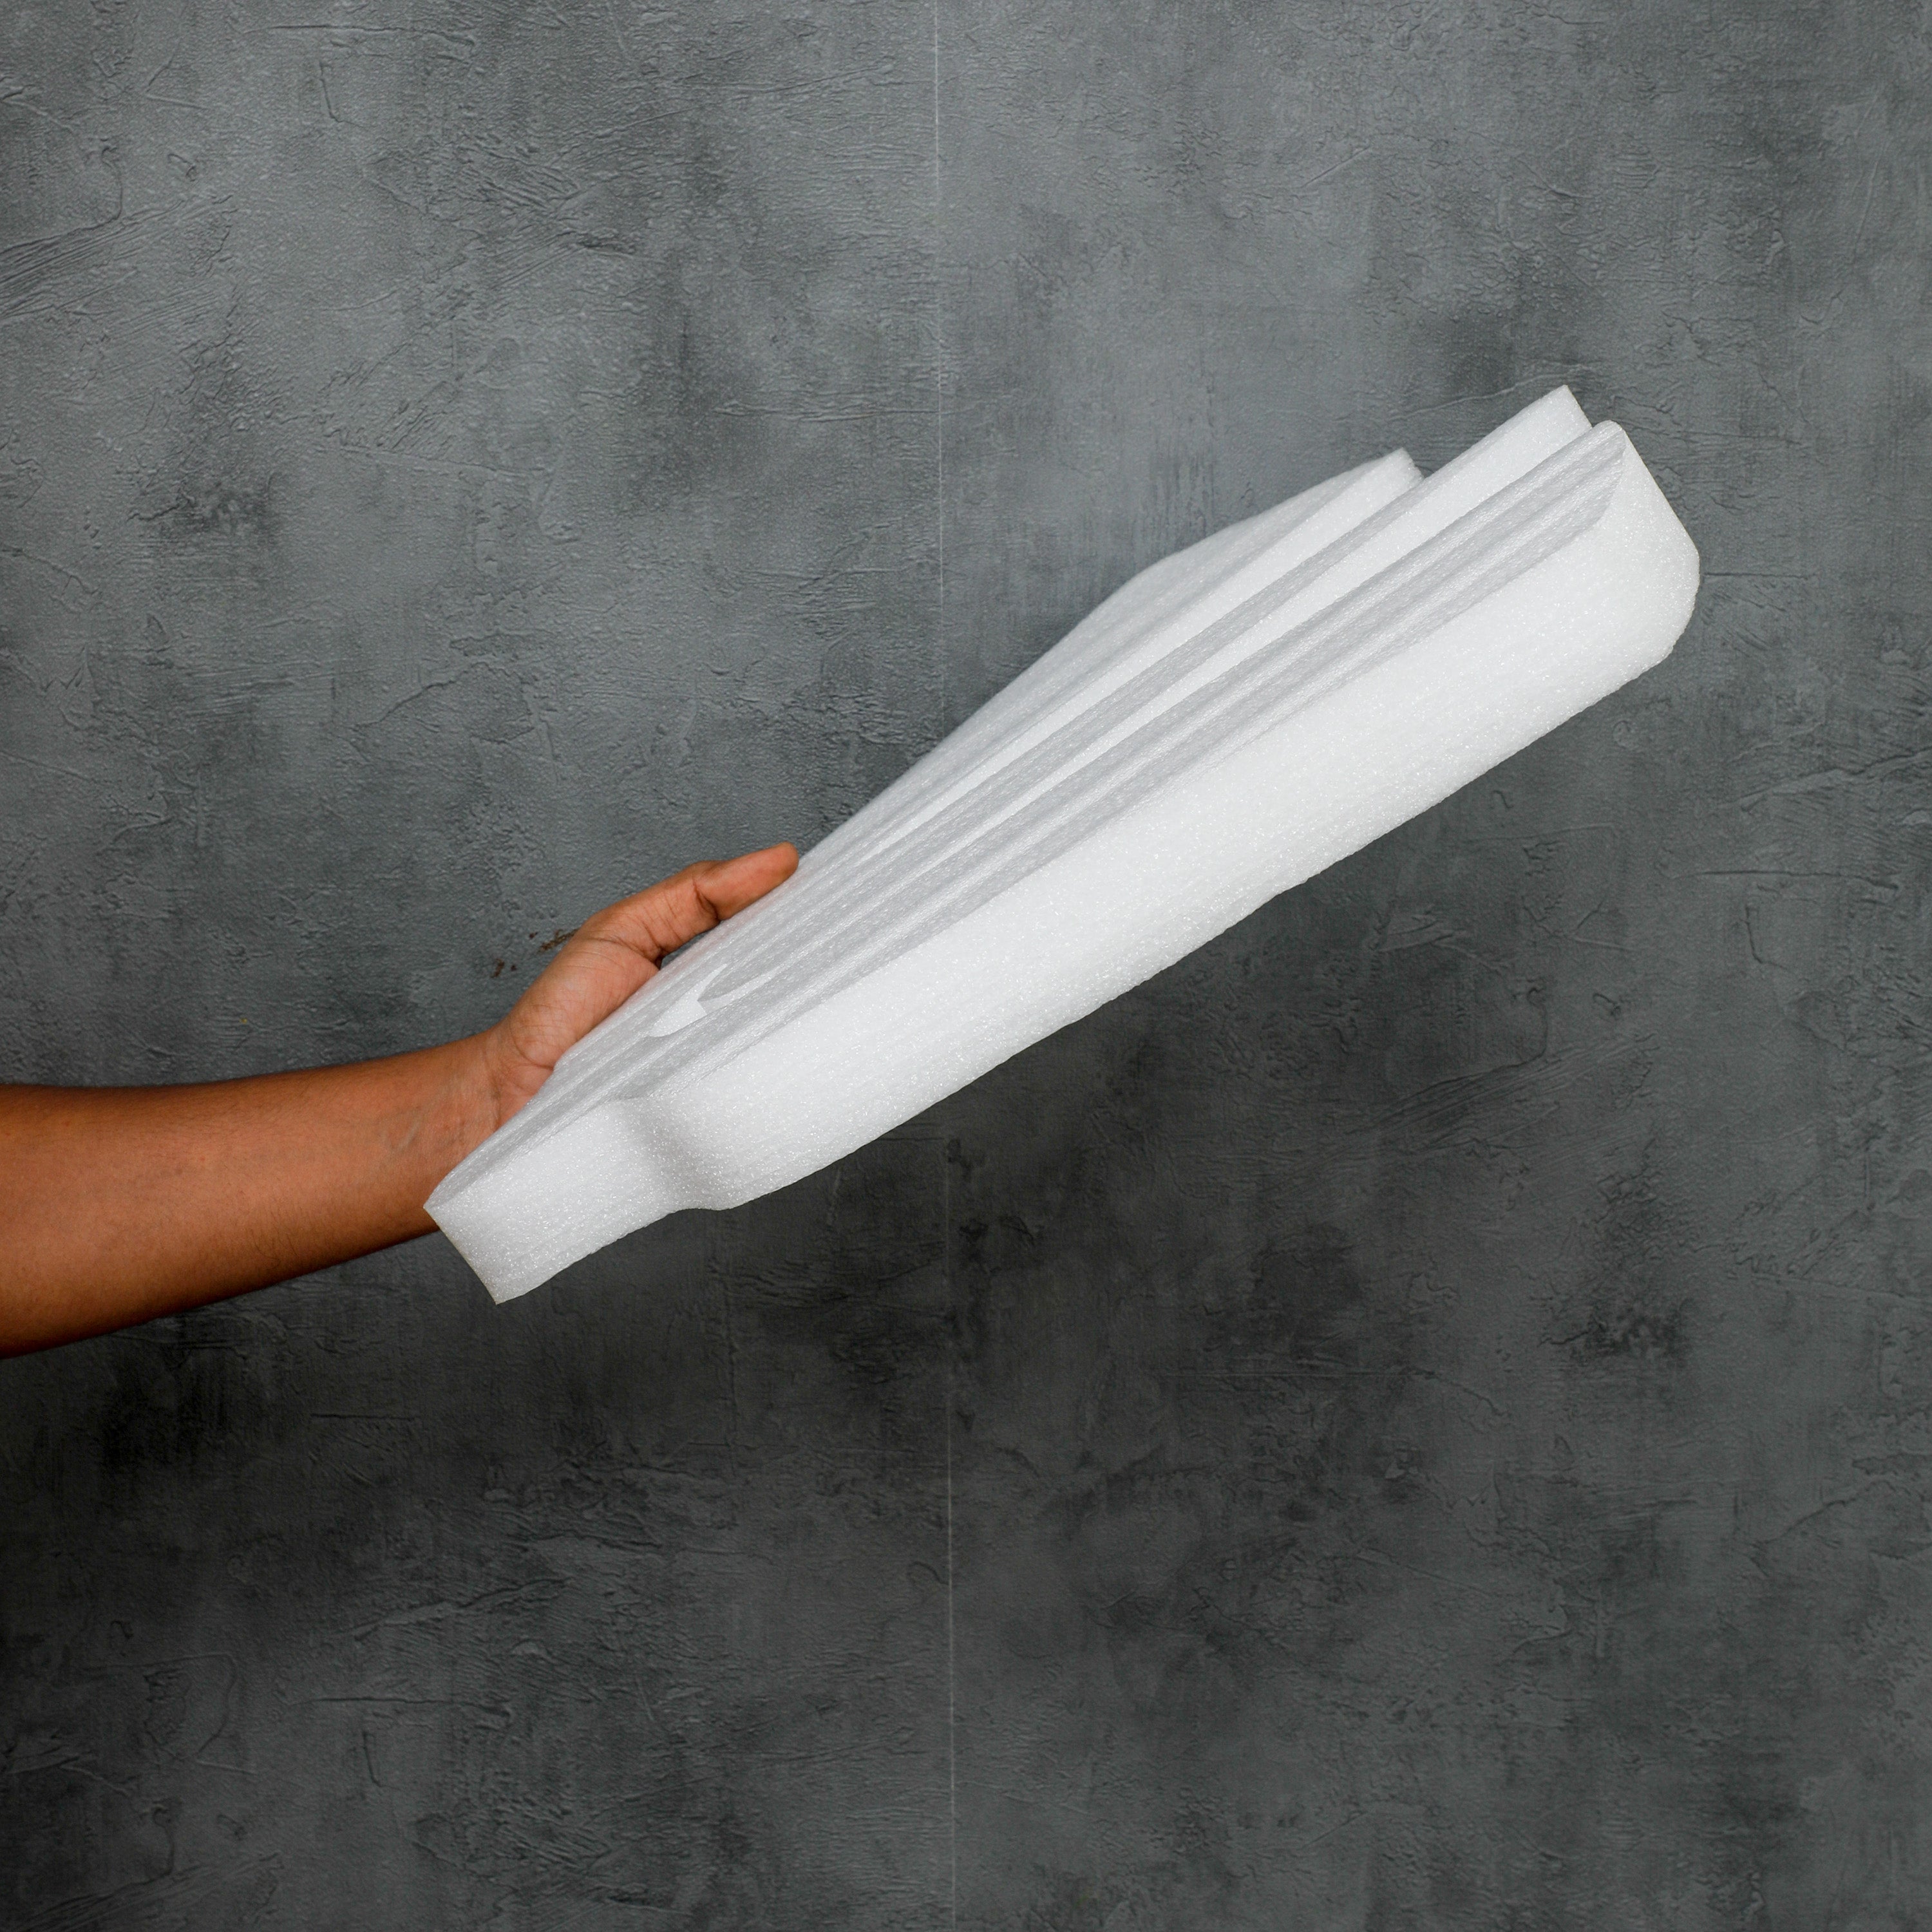 foam sheets with a thickness of 1.5 inches